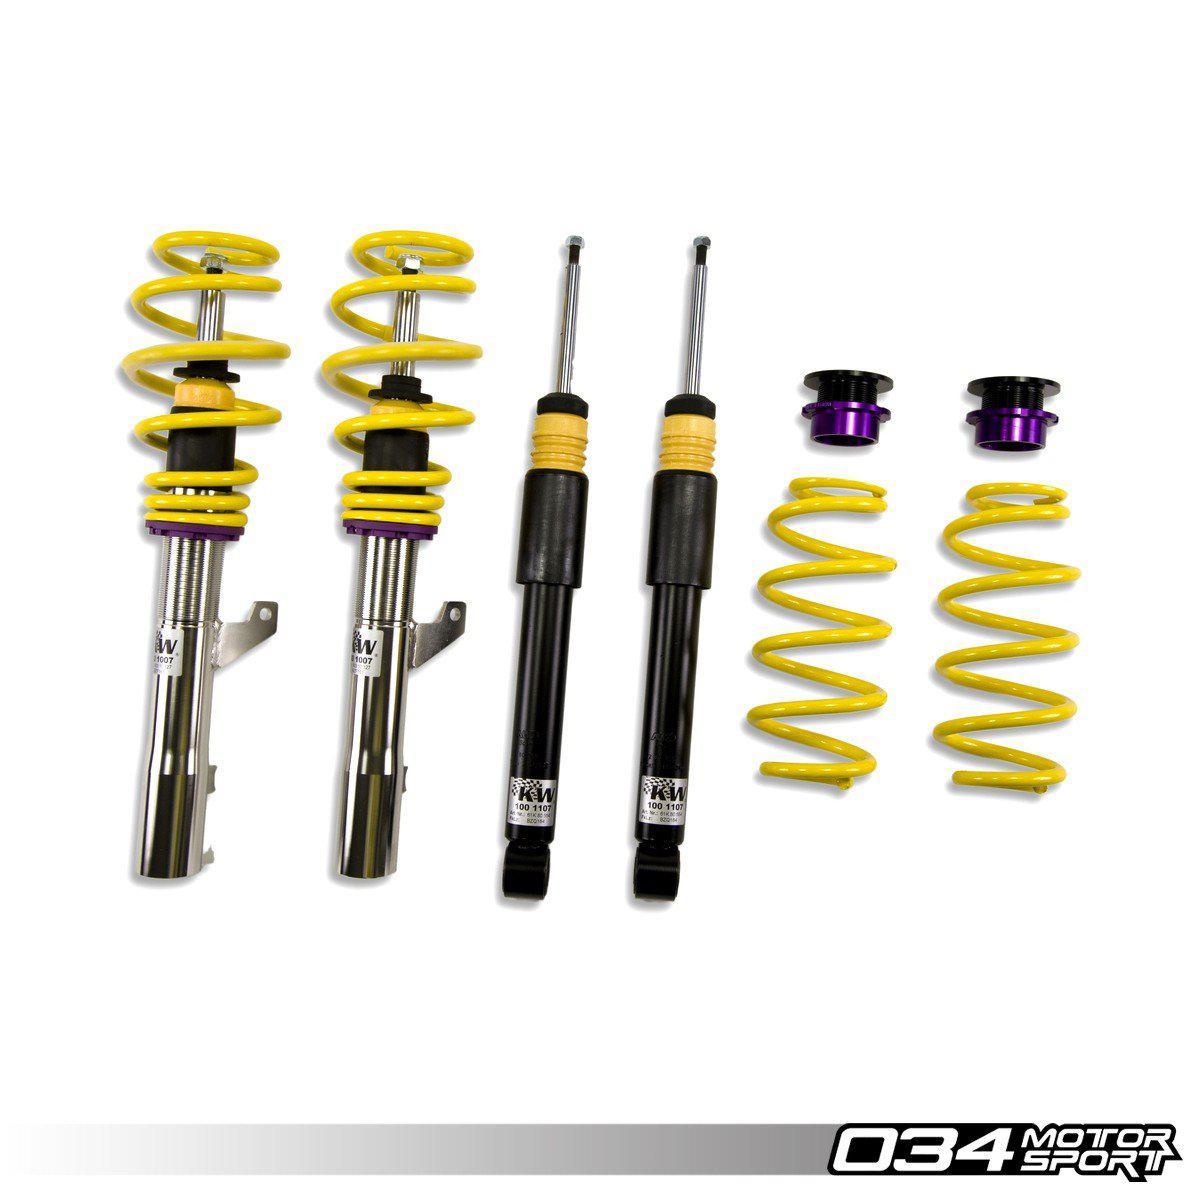 KW Variant 1 Coilover Suspension, MKIV Volkswagen Golf/GTI FWD-A Little Tuning Co